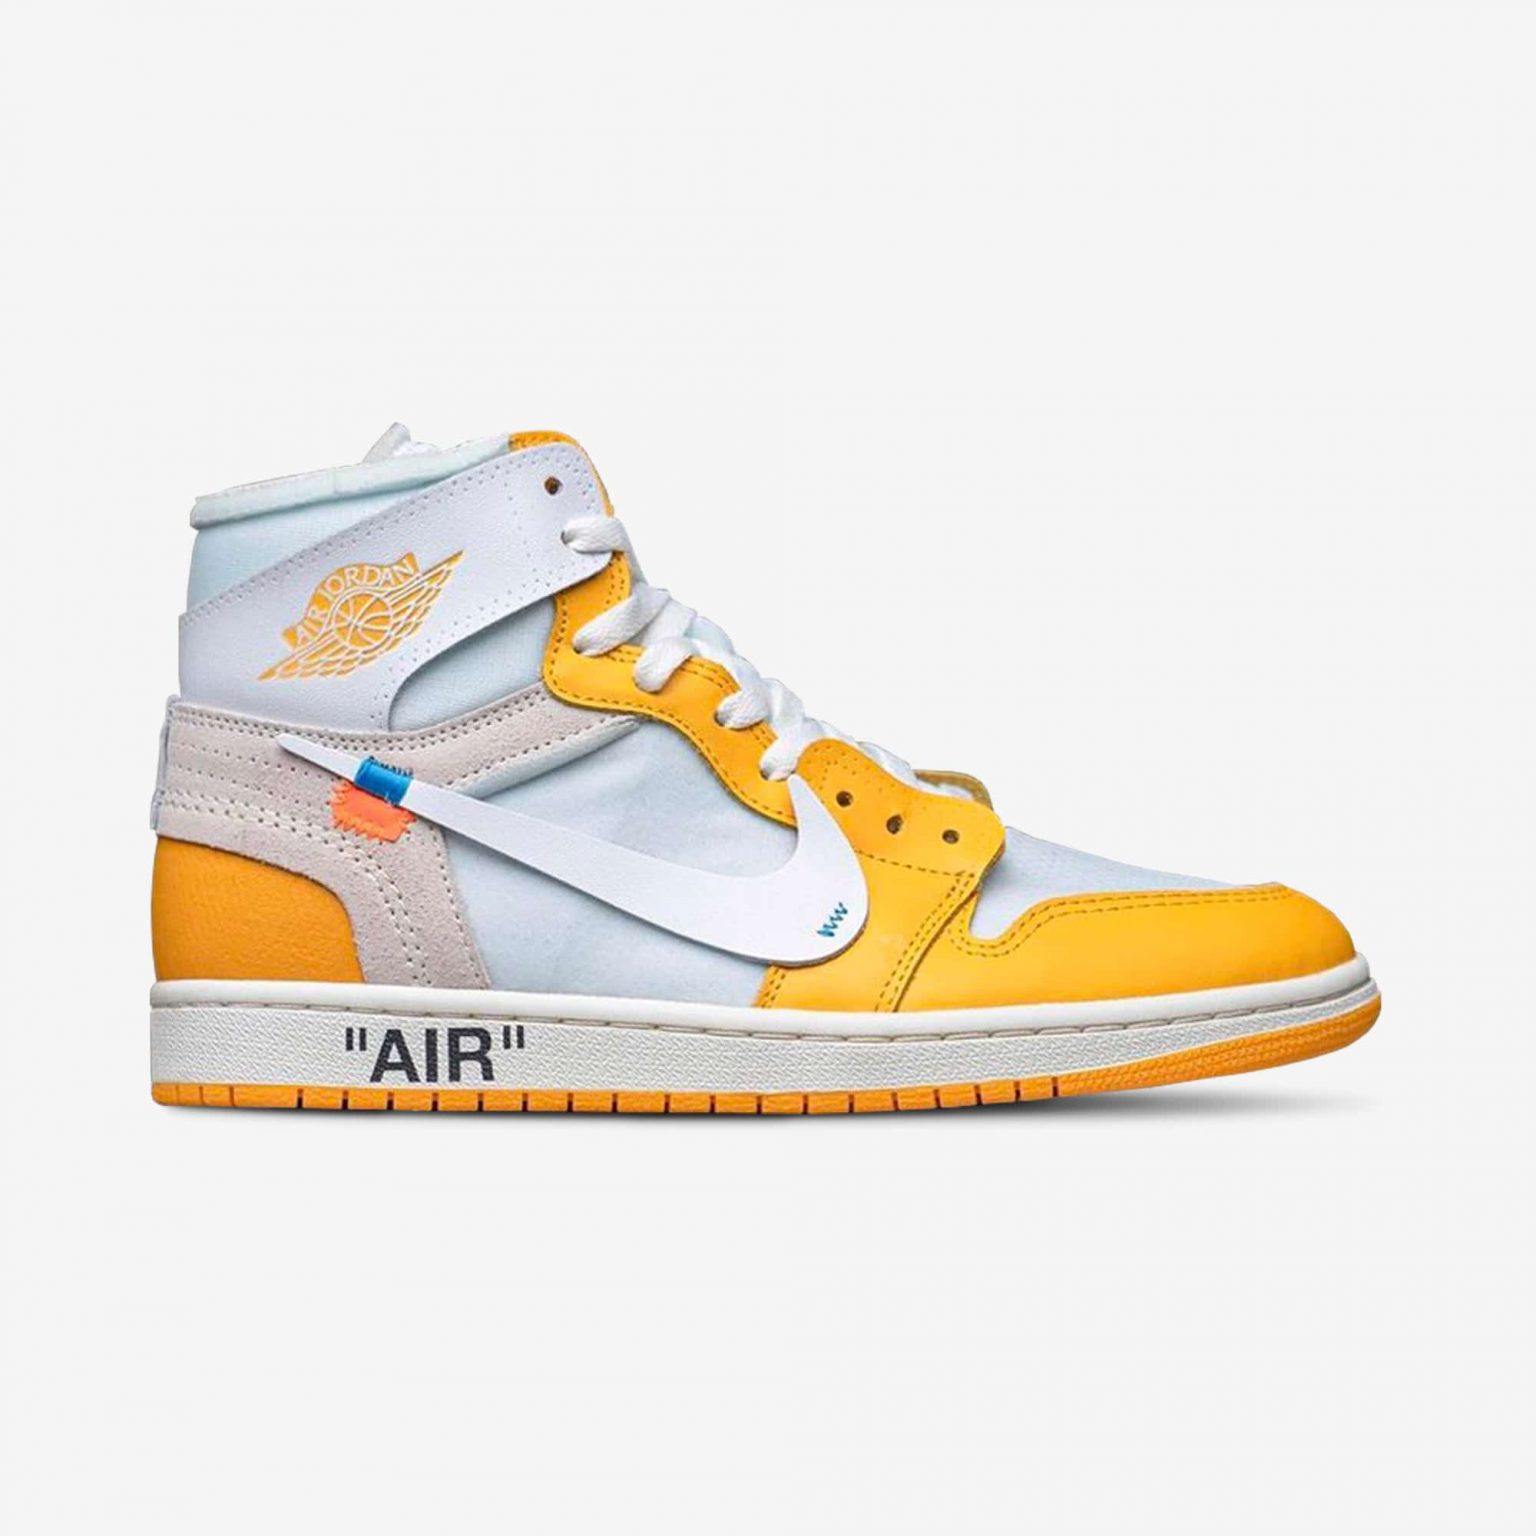 How to Cop Air Jordan 1 Off-White Canary Yellow Raffles